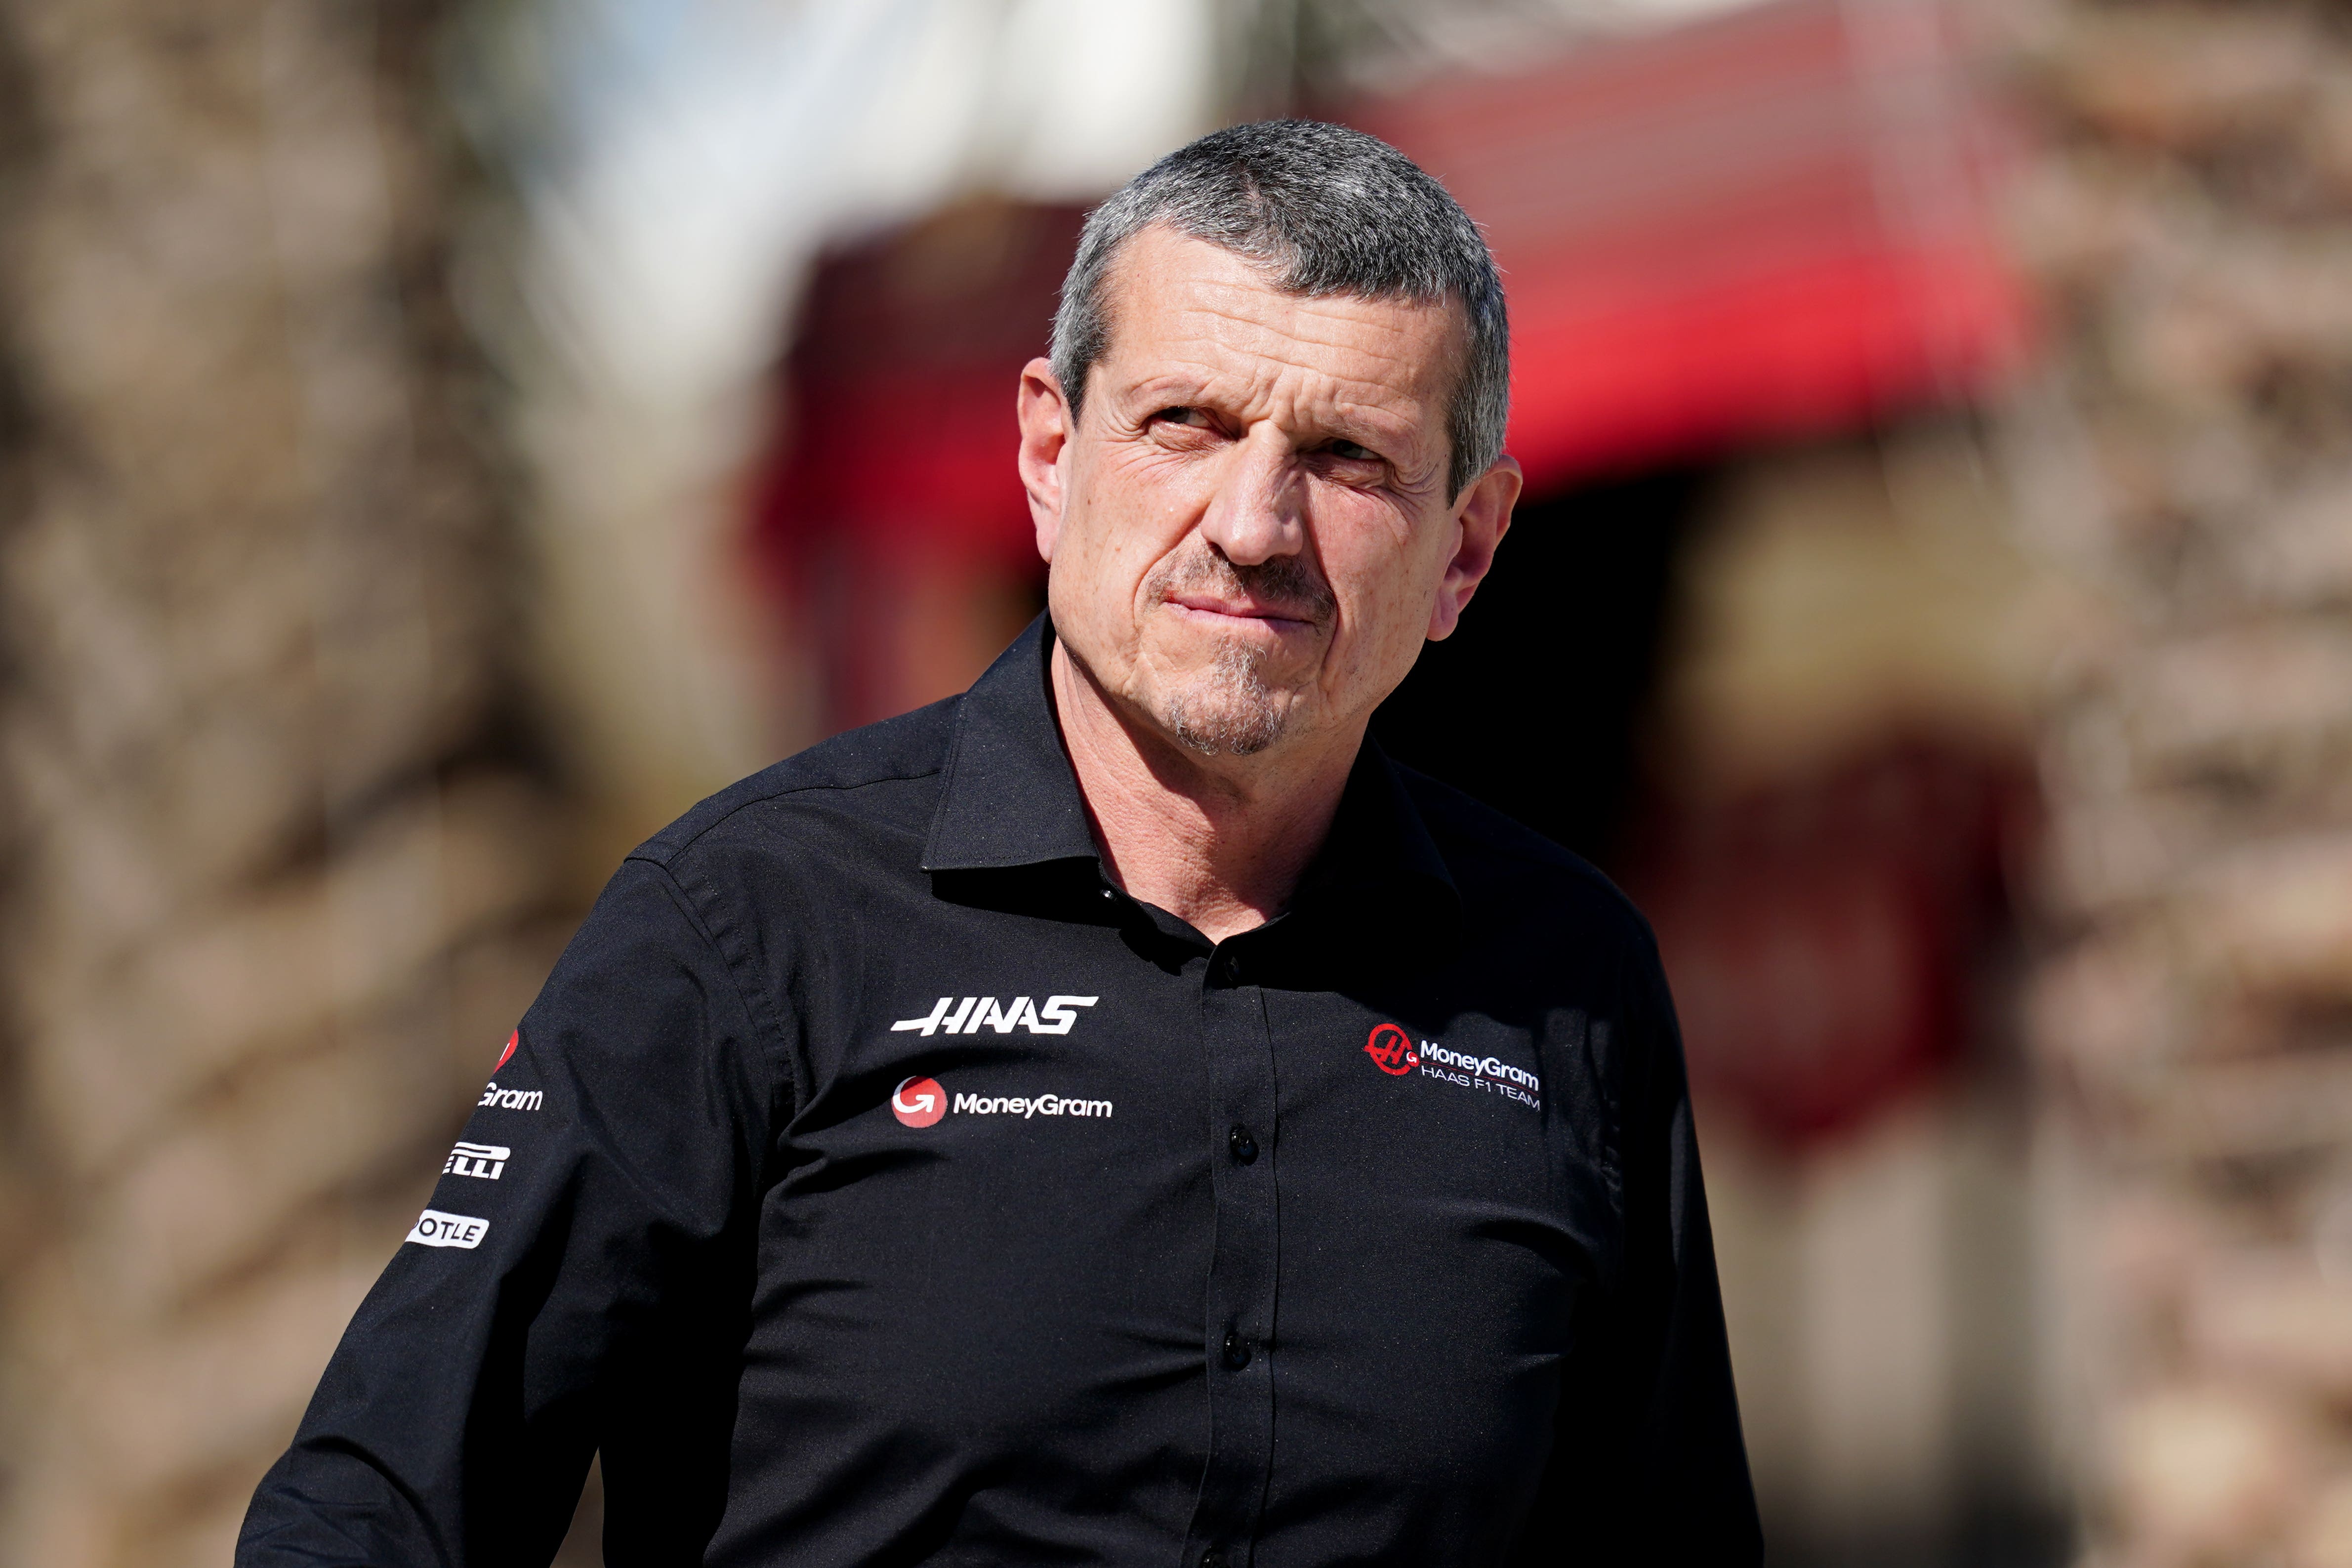 It was a dissapointing year for Guenther Steiner’s Haas team, who pick up the wooden spoon